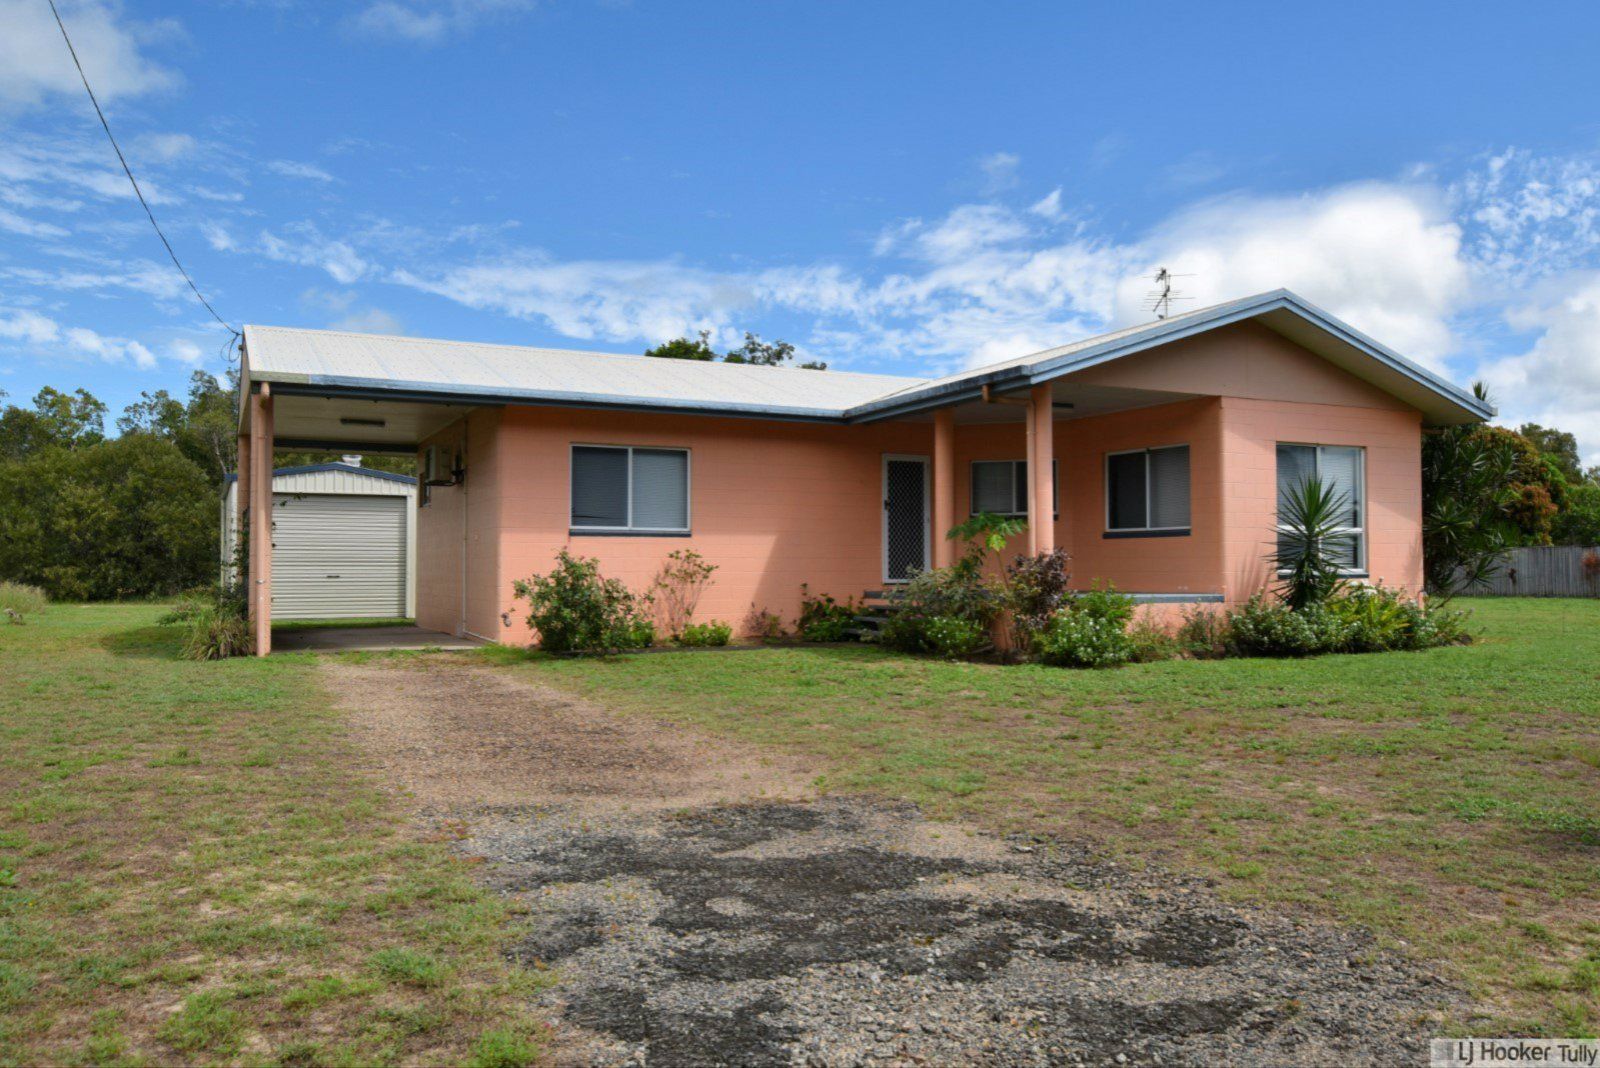 75 Taylor Street, Tully Heads QLD 4854, Image 0